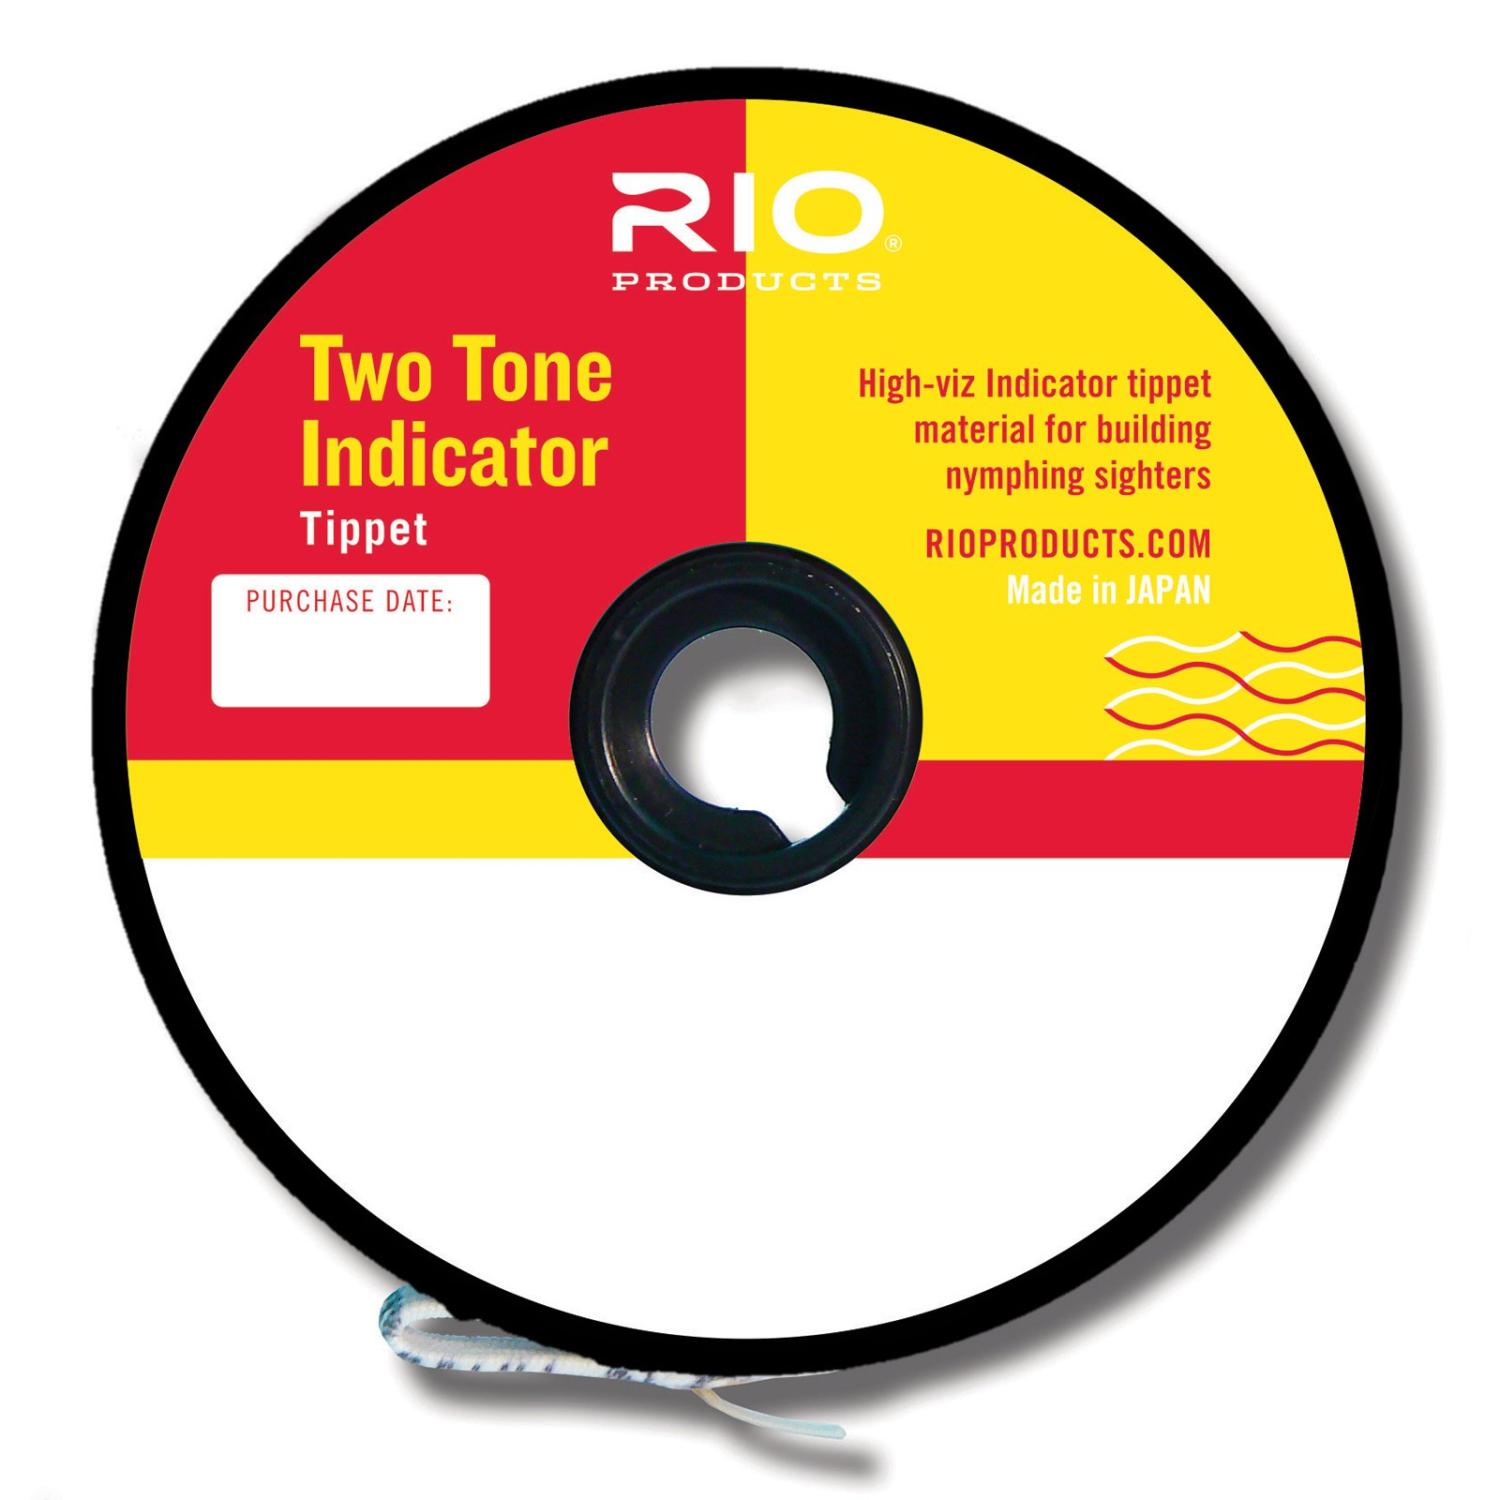 RIO Products Tippet 2-Tone Indicator Tippet 2X, Fluorescent pink and yellow